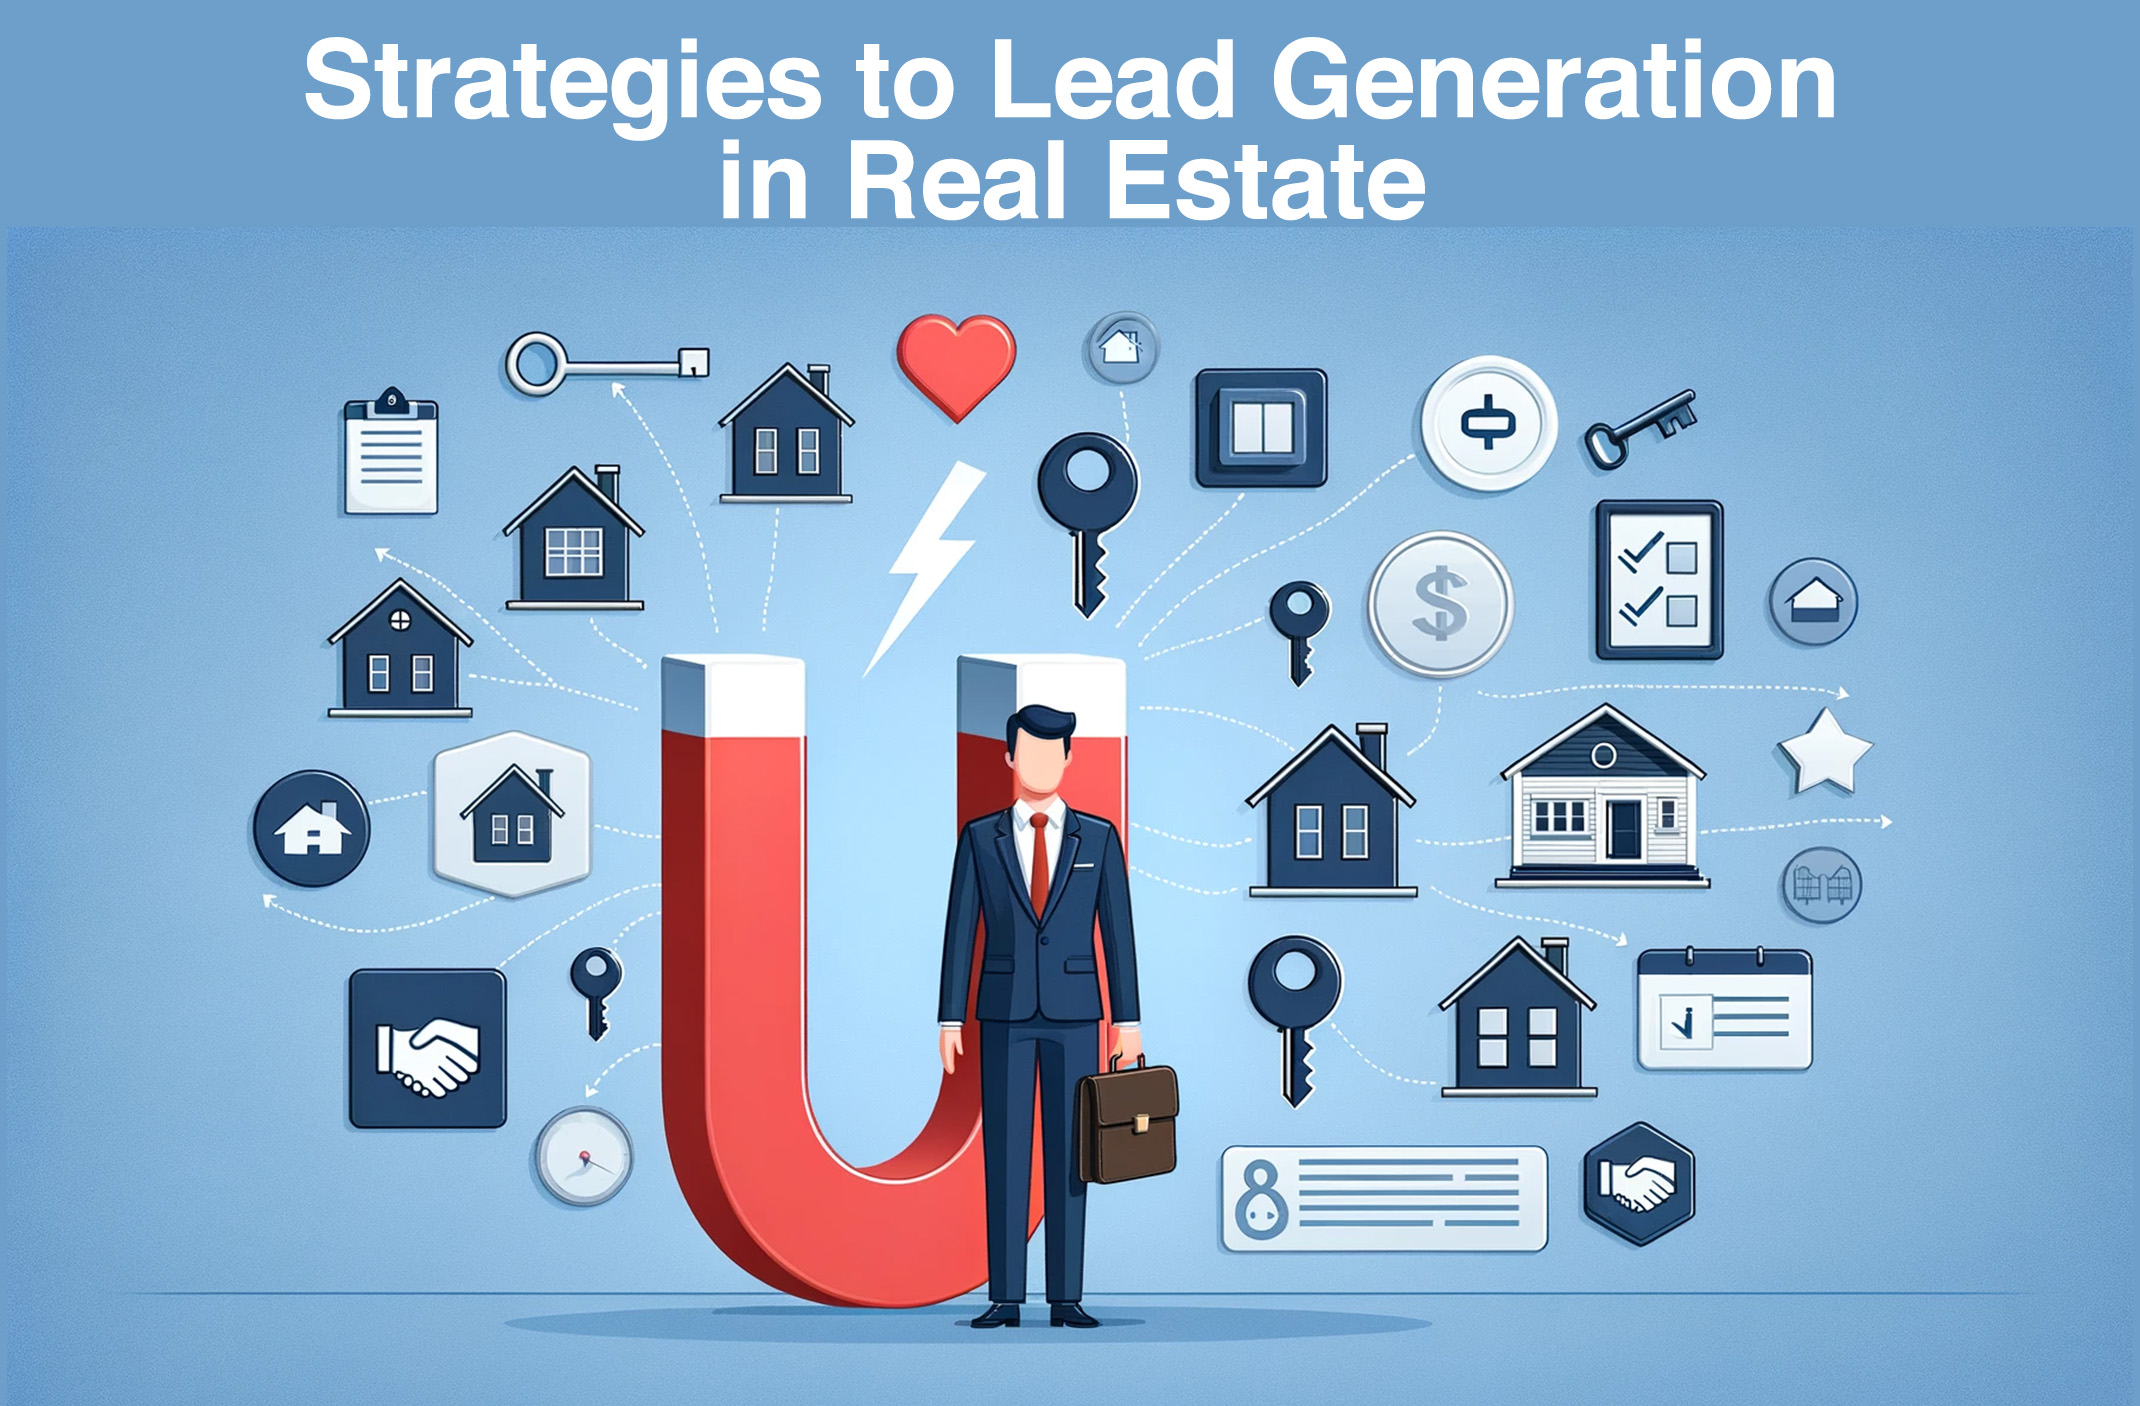 Strategies to Lead Generation in Real Estate